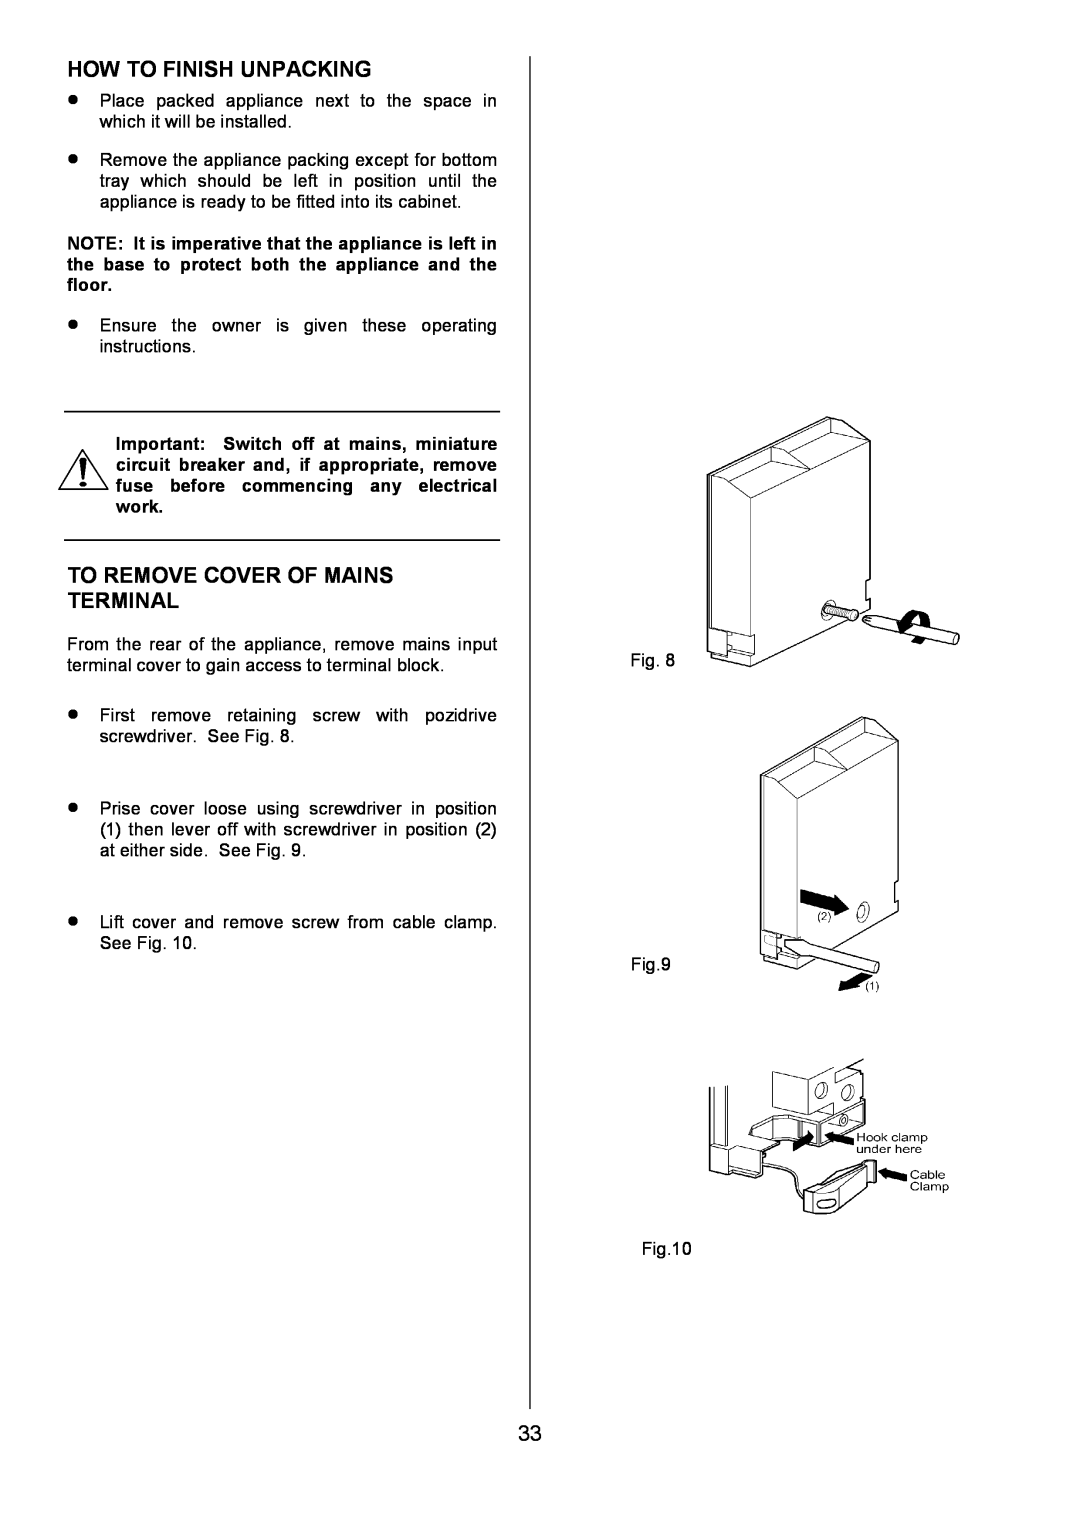 AEG U3100-4 manual How To Finish Unpacking, To Remove Cover Of Mains Terminal 